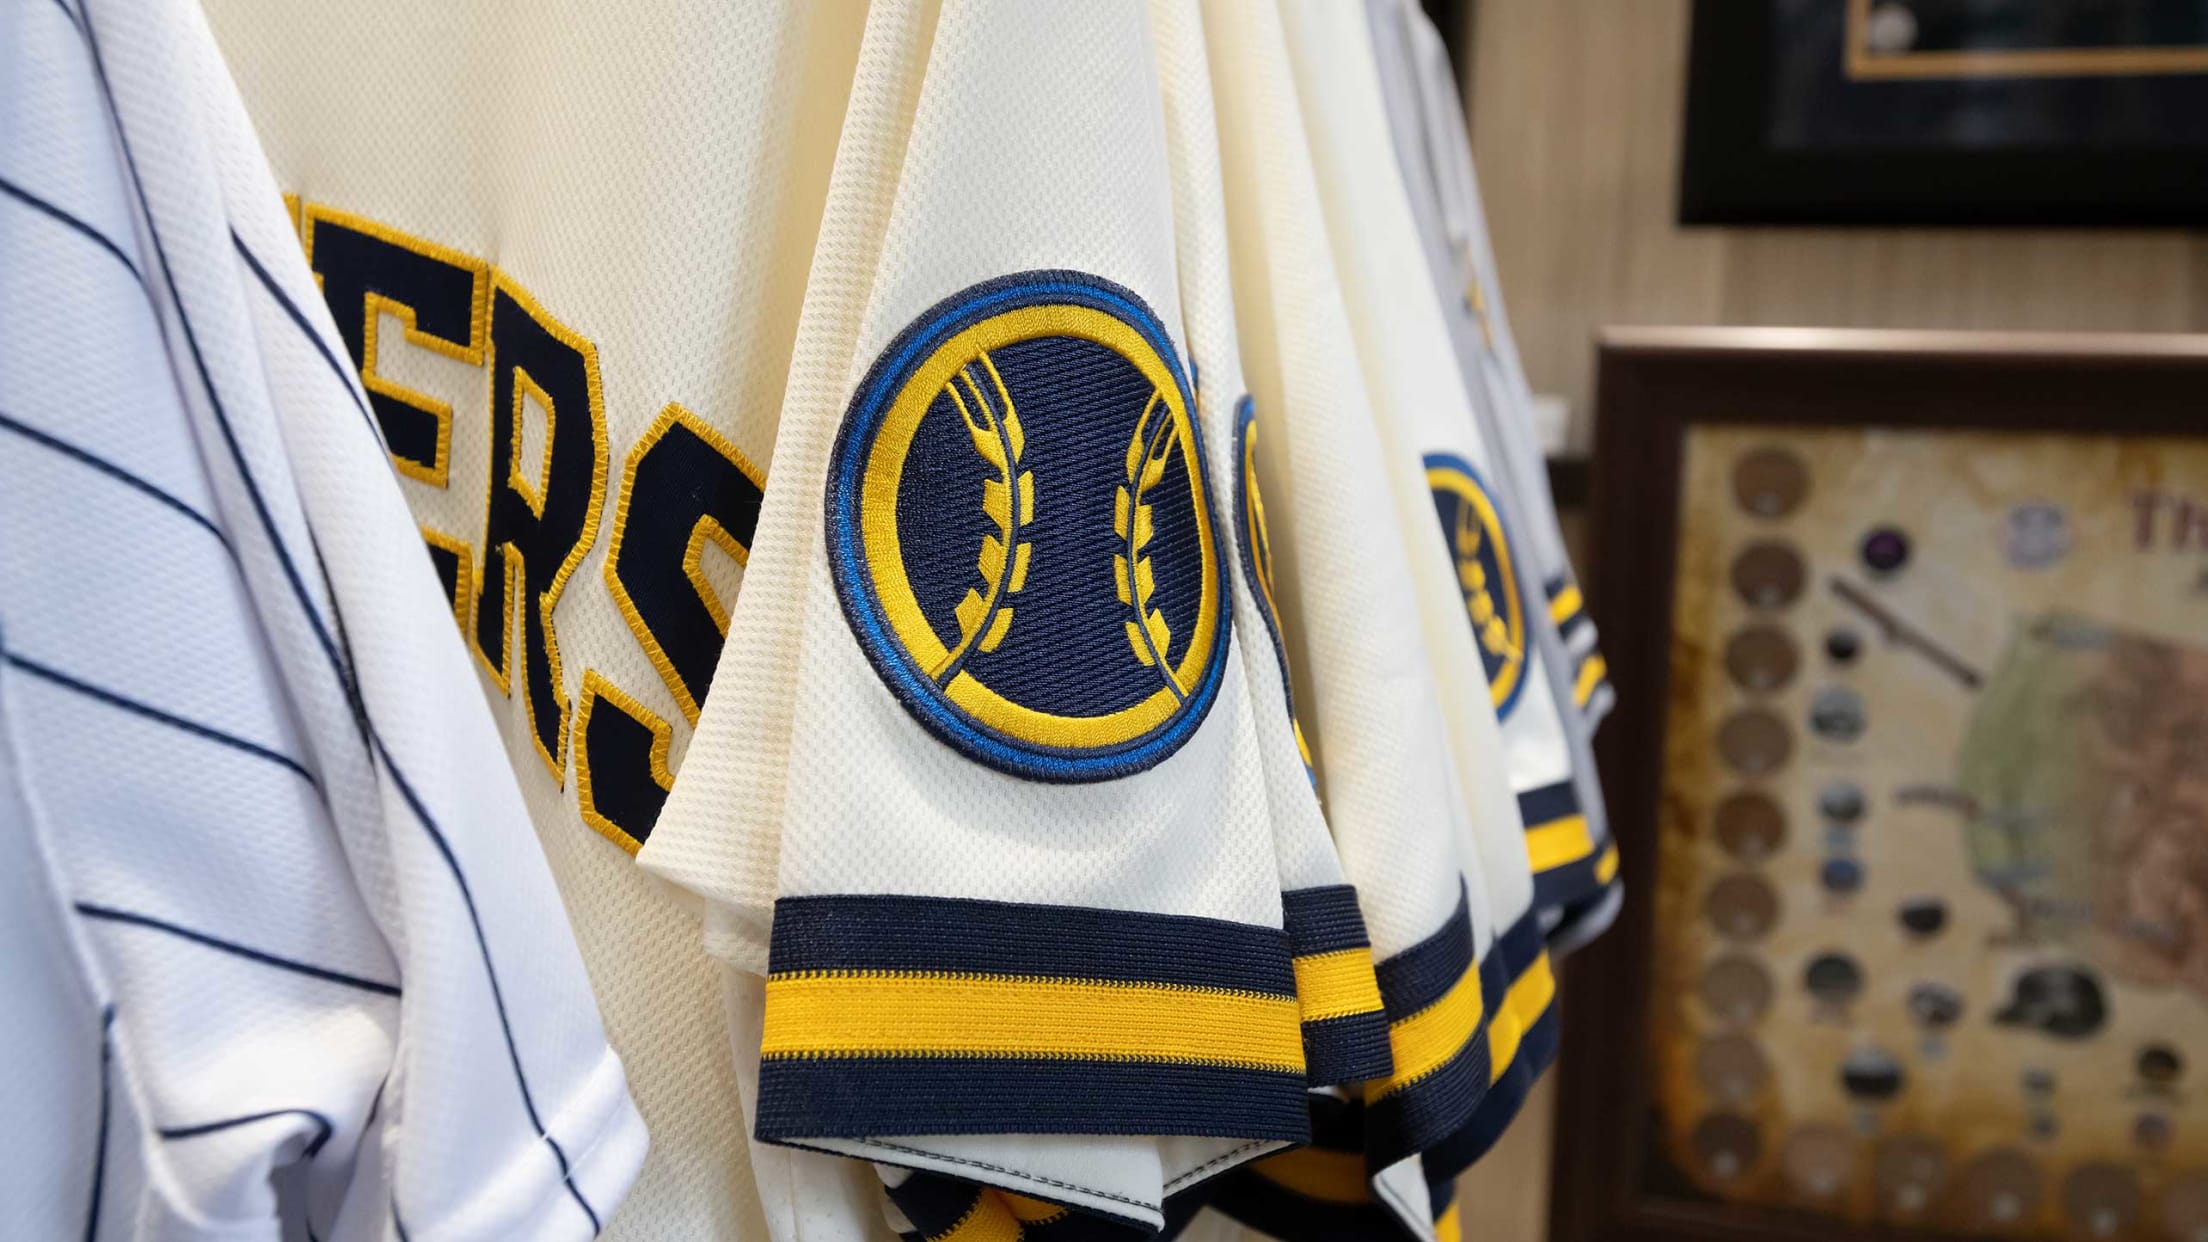 brewers jerseys through the years